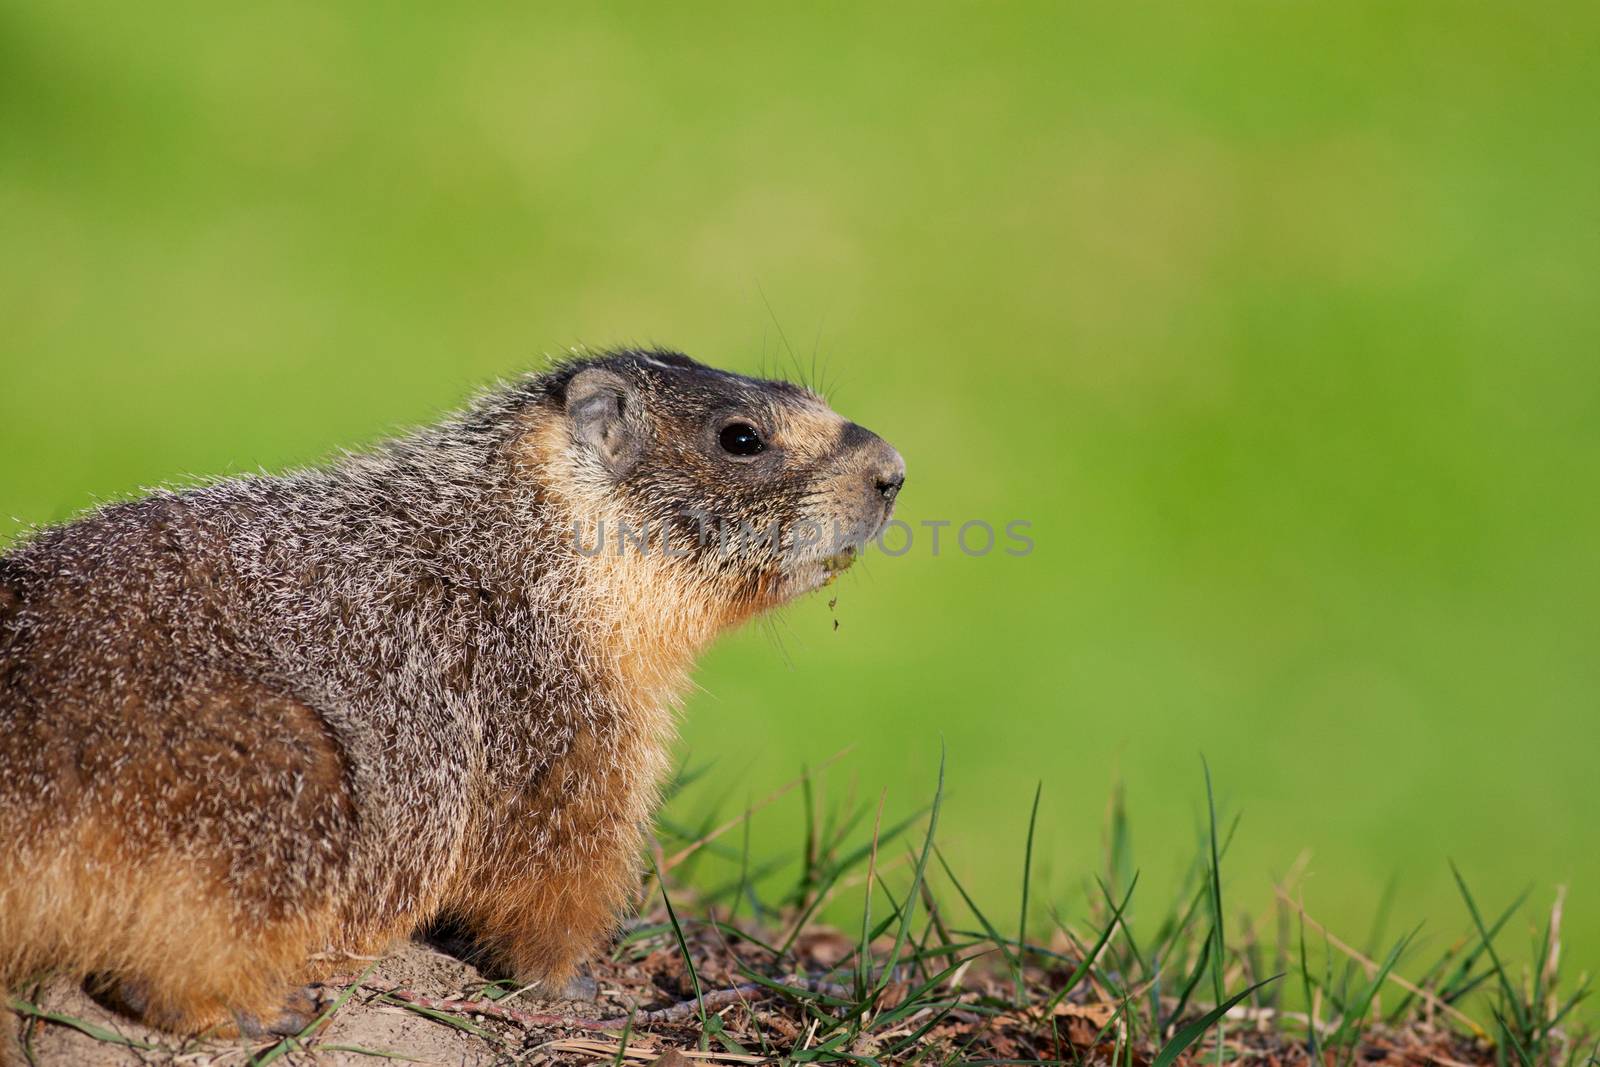 Yellow-bellied marmot with grass hanging from his mouth.  Near Wilson's Landing by Kelowna, British Columbia, Canada.